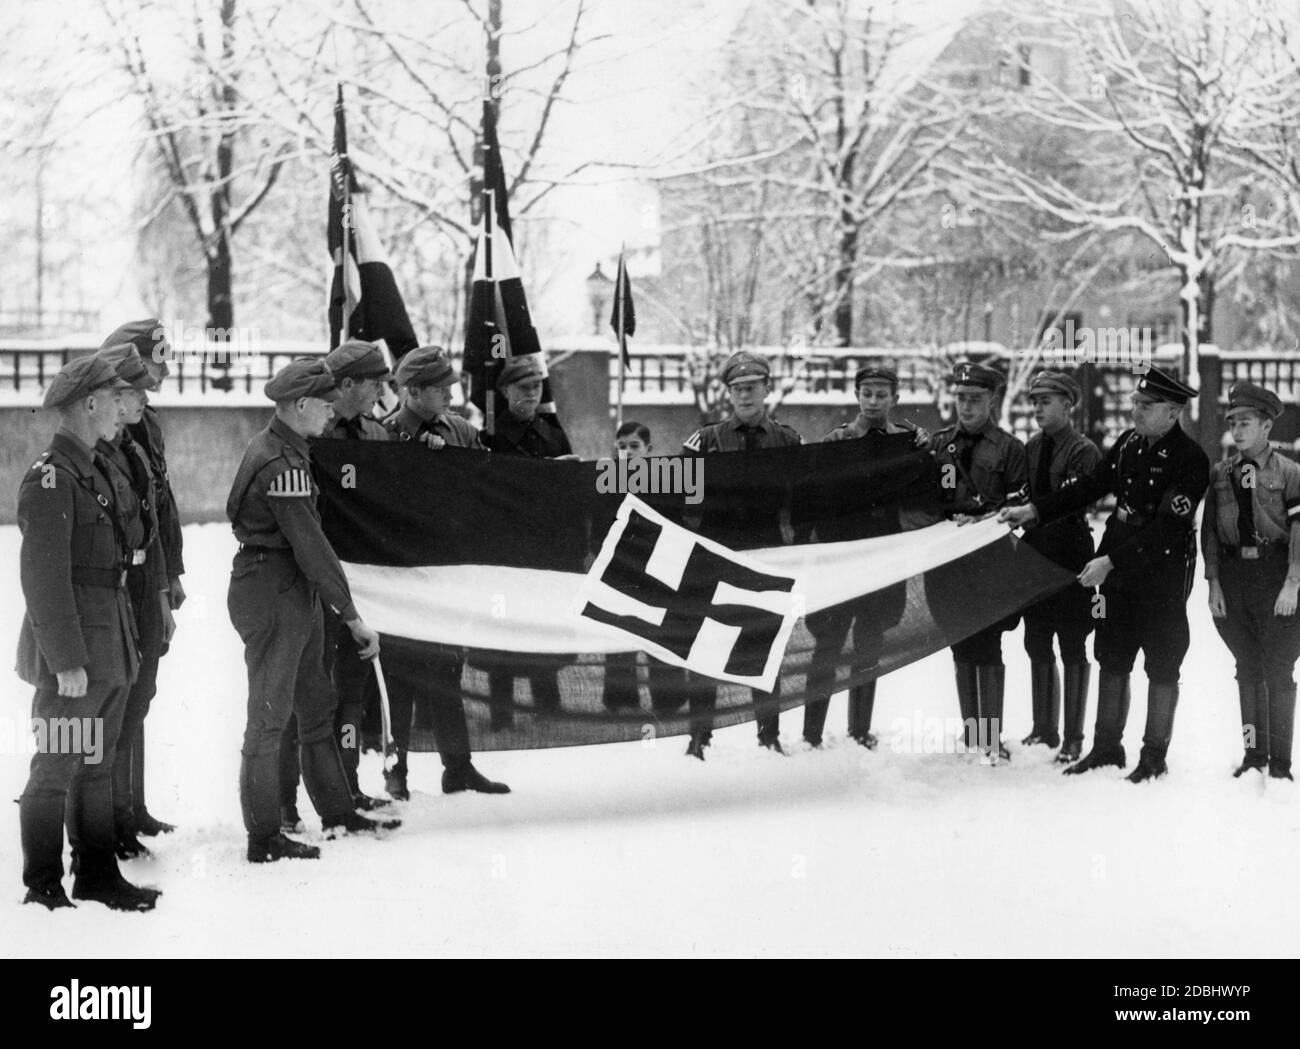 The Realgymnasium in Lichtenrade is the first school in Berlin to receive an HJ flag, as over 90% of the pupils are members of the HJ. The flag may be raised at all ceremonies. On the right in SS uniform stands the headmaster of the school Dr. Koeditz. Stock Photo